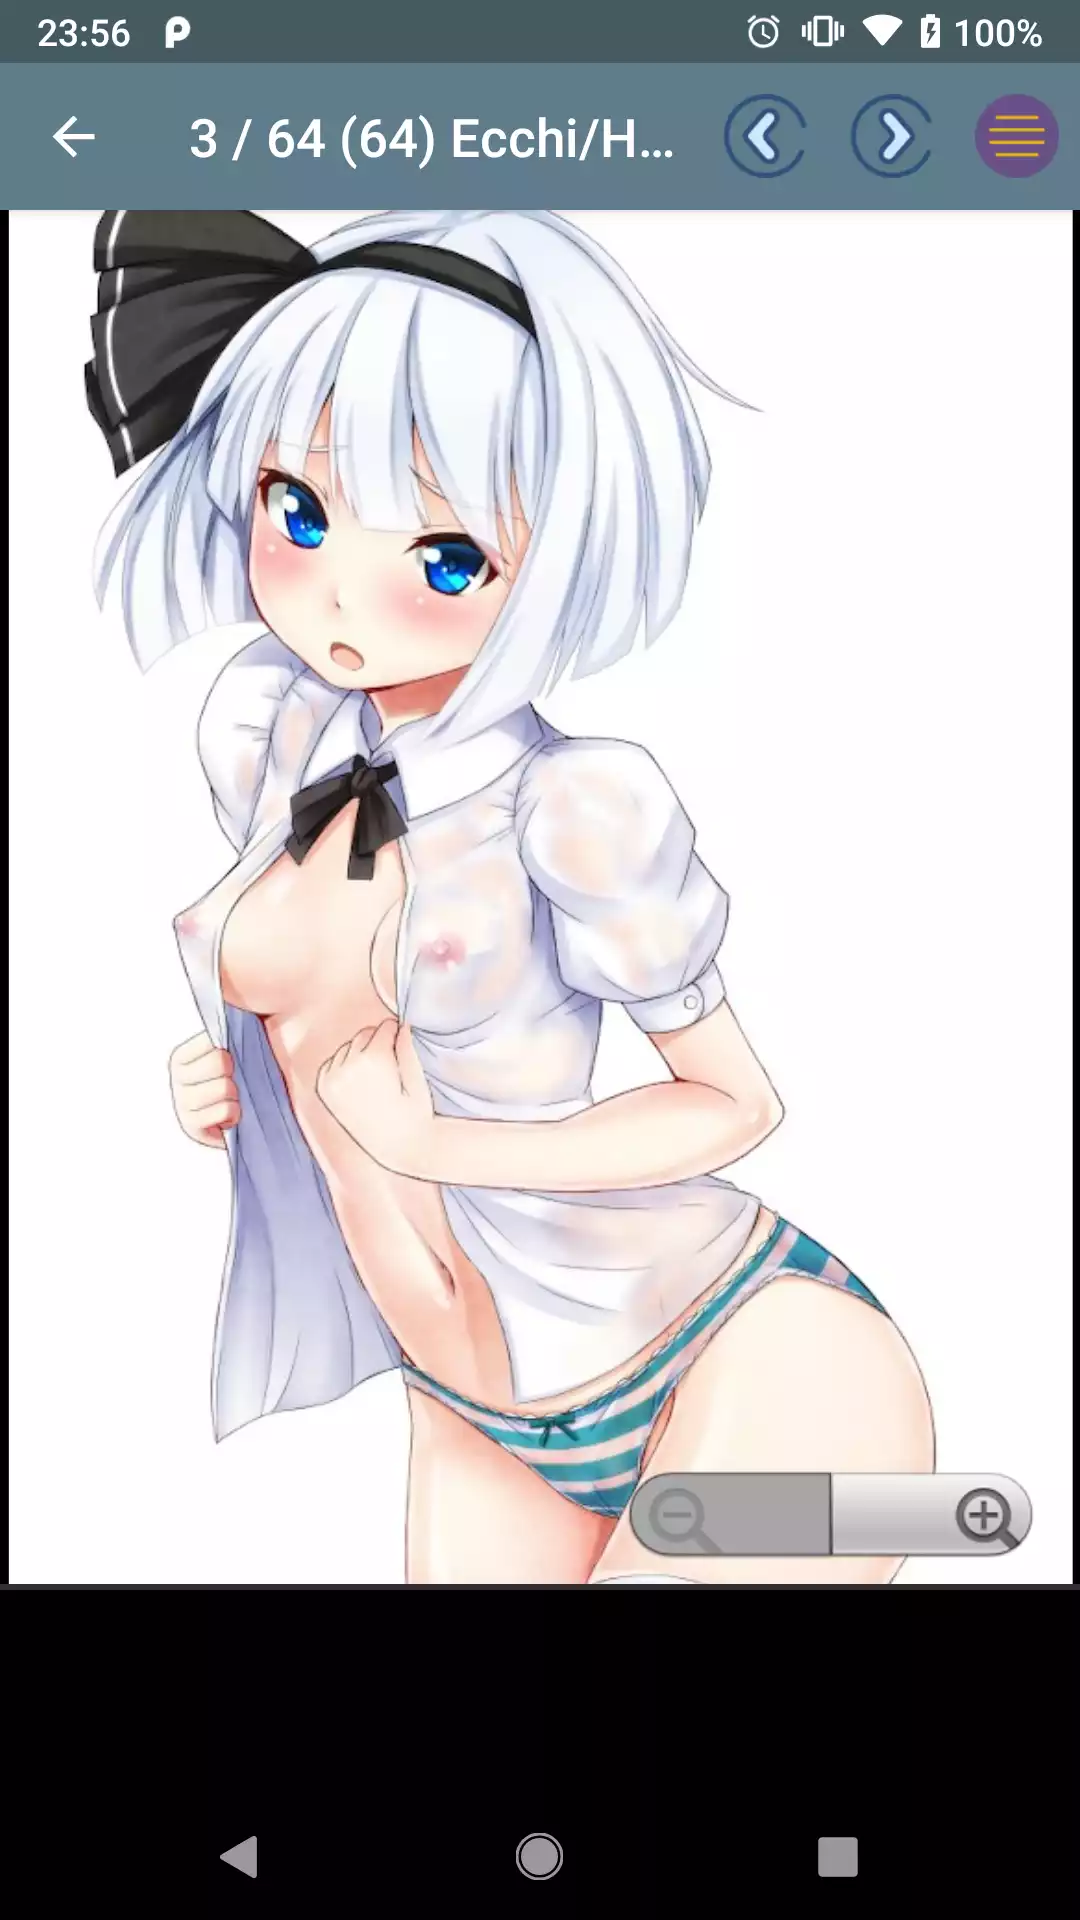 Hentai Galleries Packs pics,free,apk,anime,apps,gallery,picture,girls,blowbang,app,galleries,sexy,drawings,hentia,best,picw,hentai,caprice,pictures